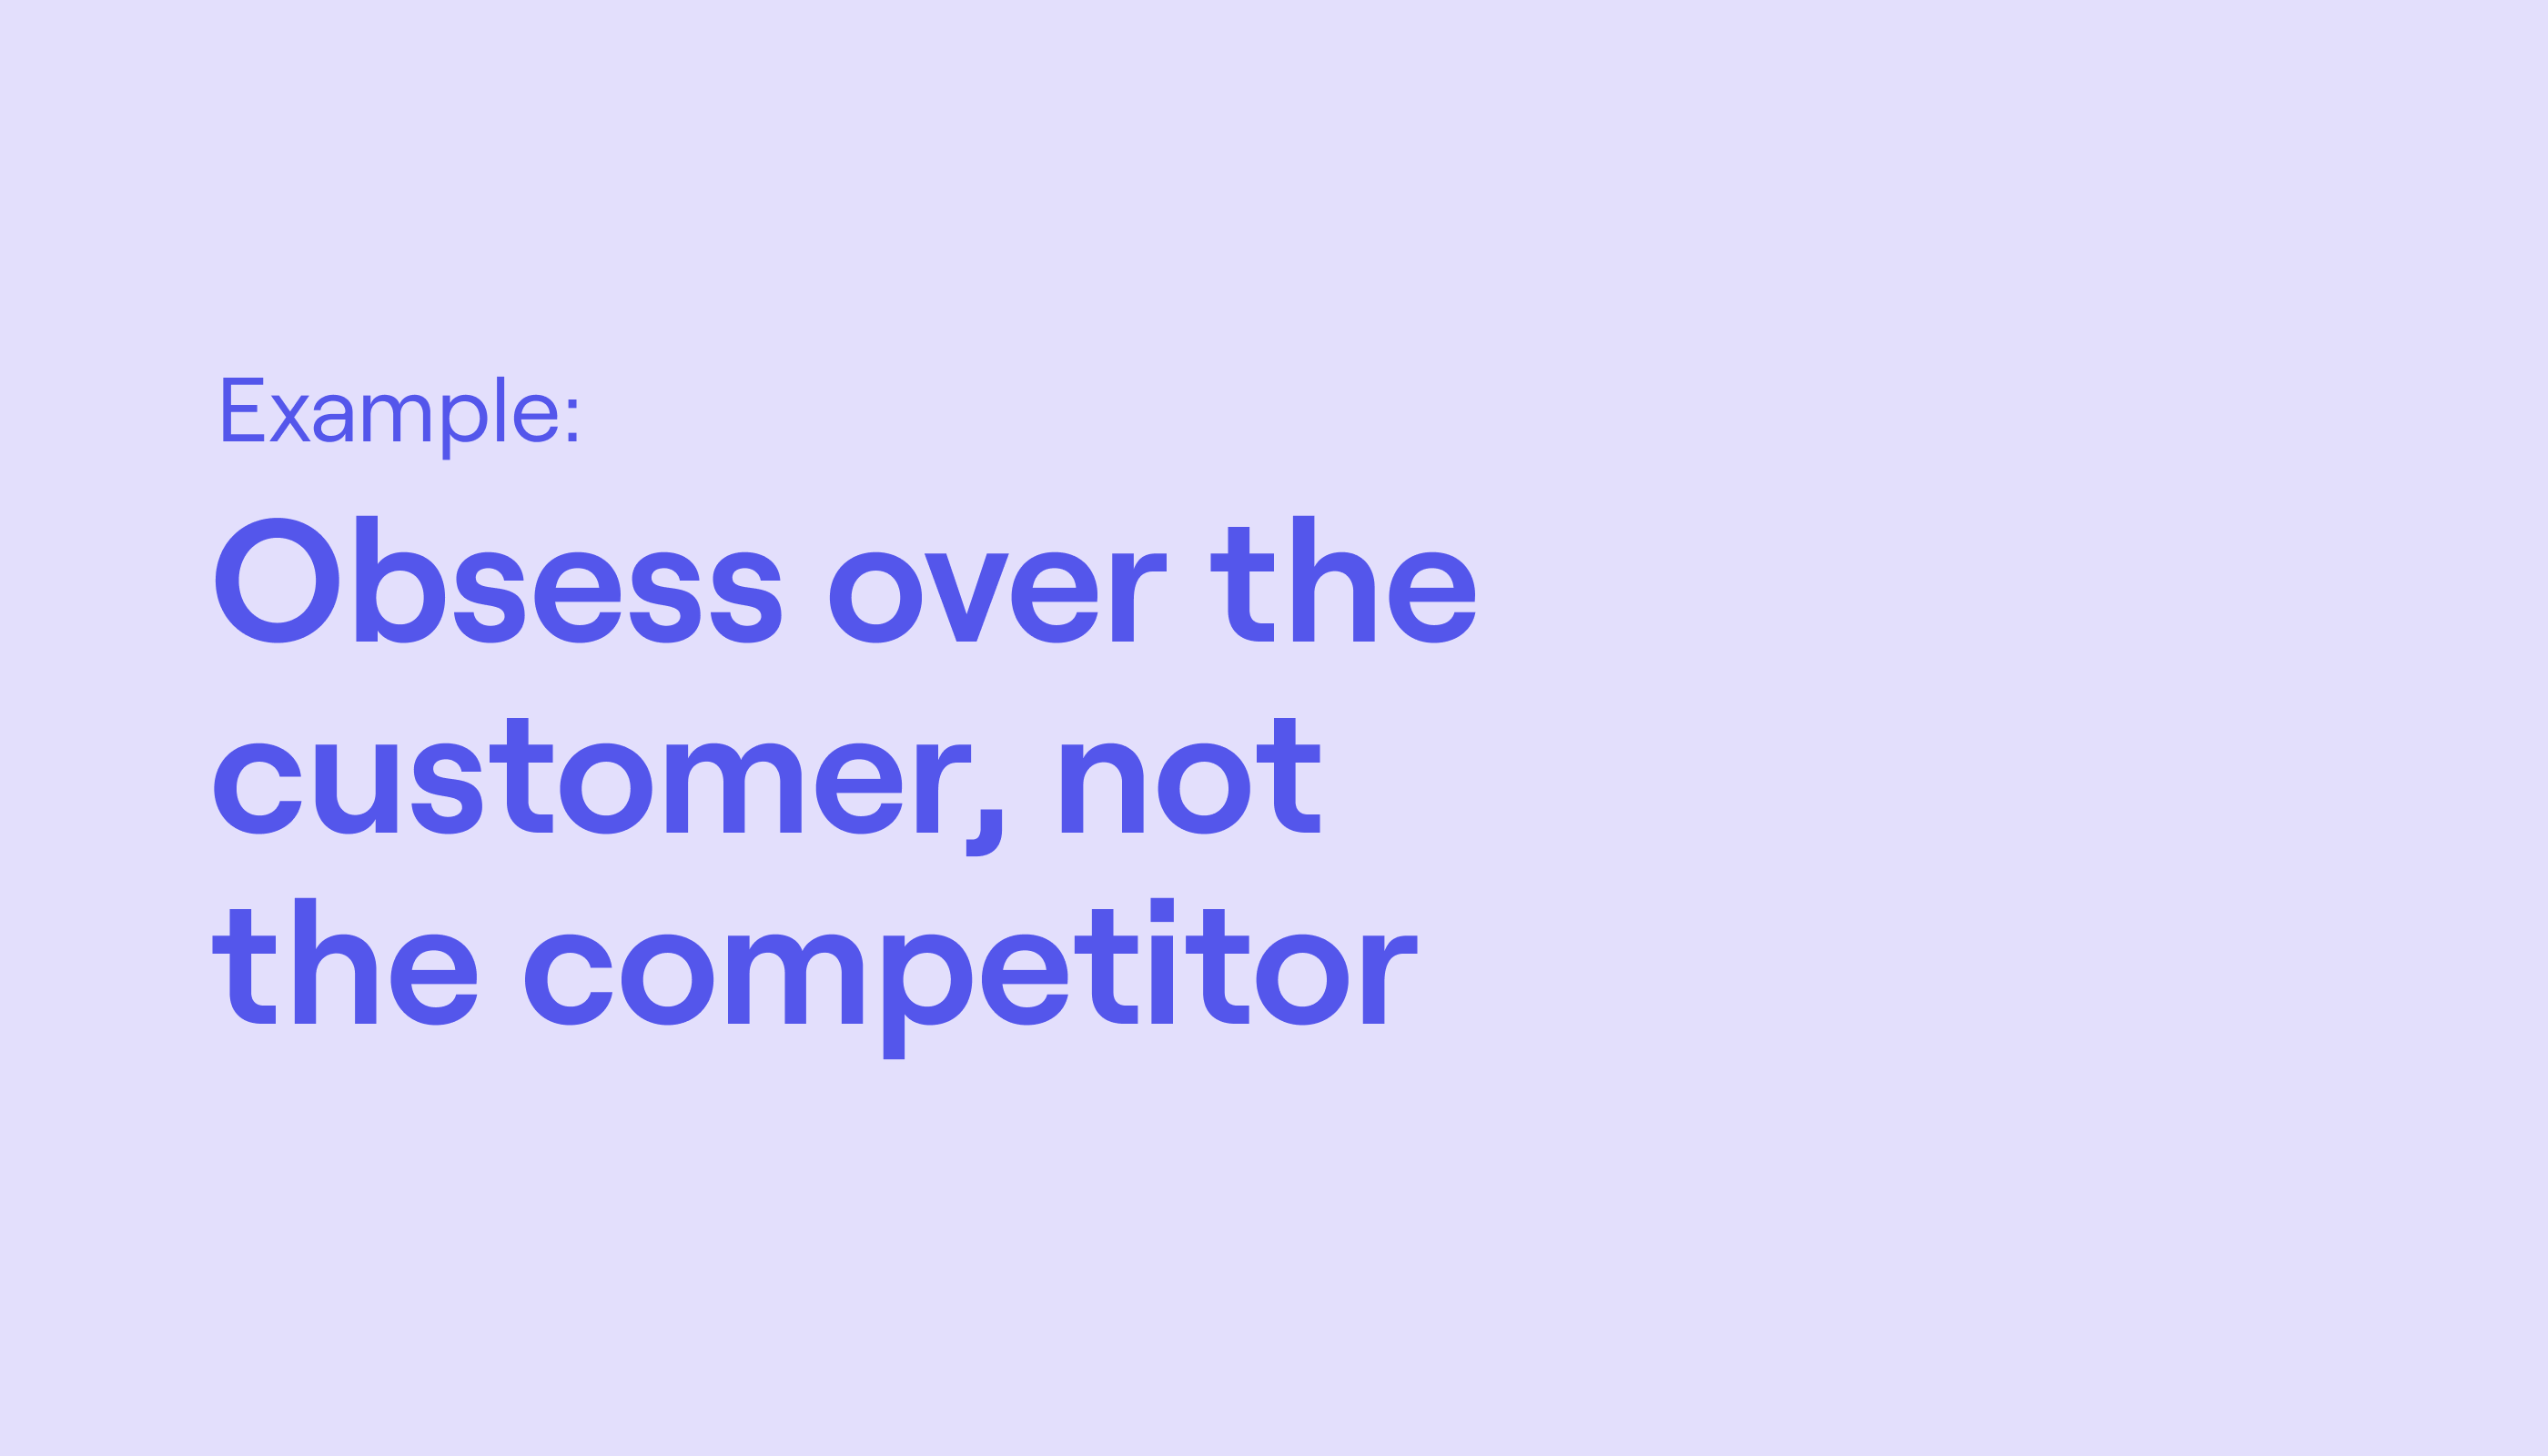 An example product principle that says: Obsess over the customer, not the competitor